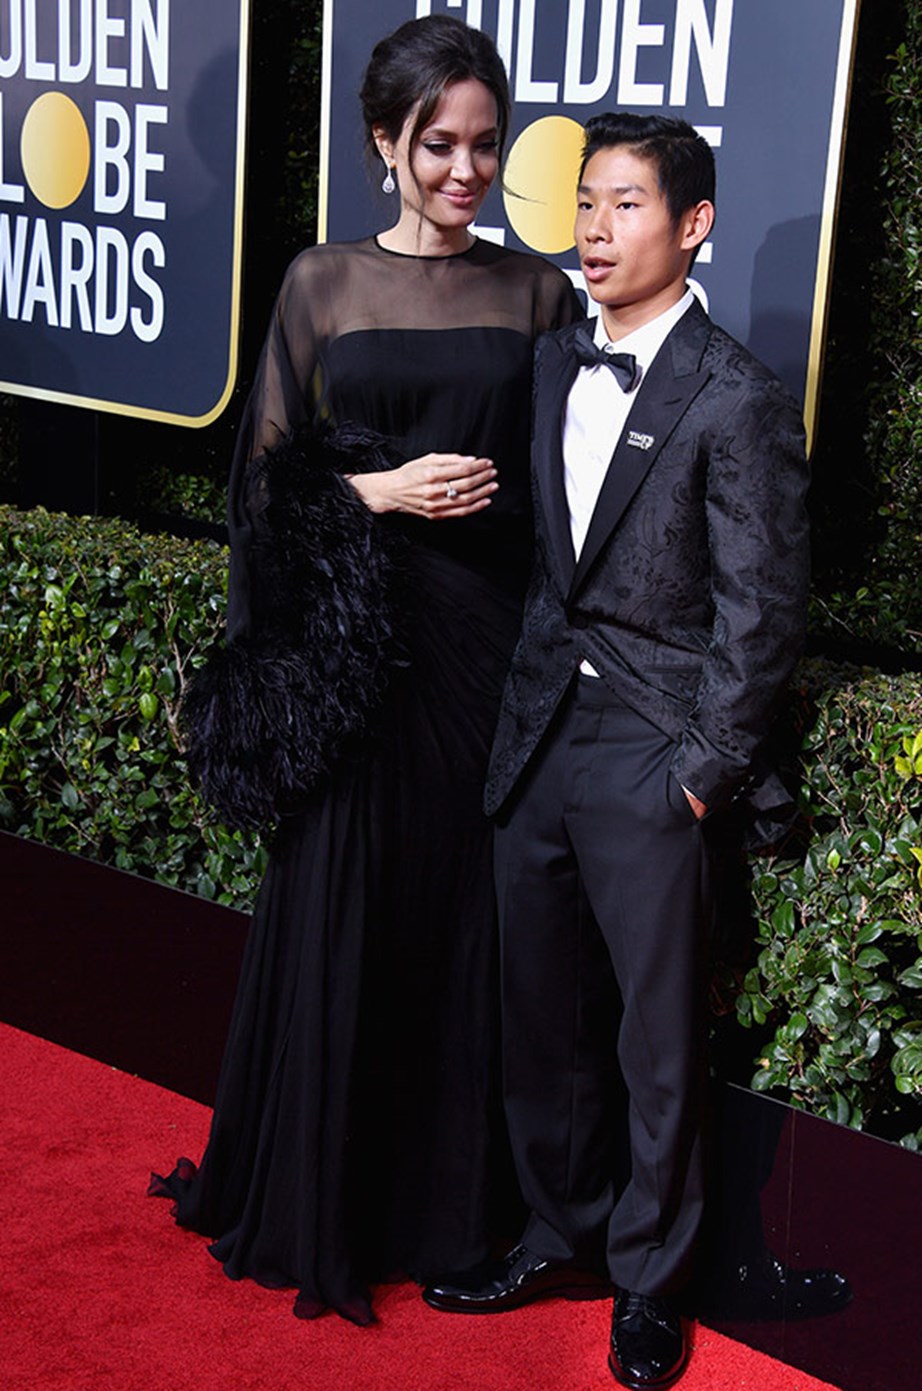 Angelina seems mighty impressed with her date, son Pax.